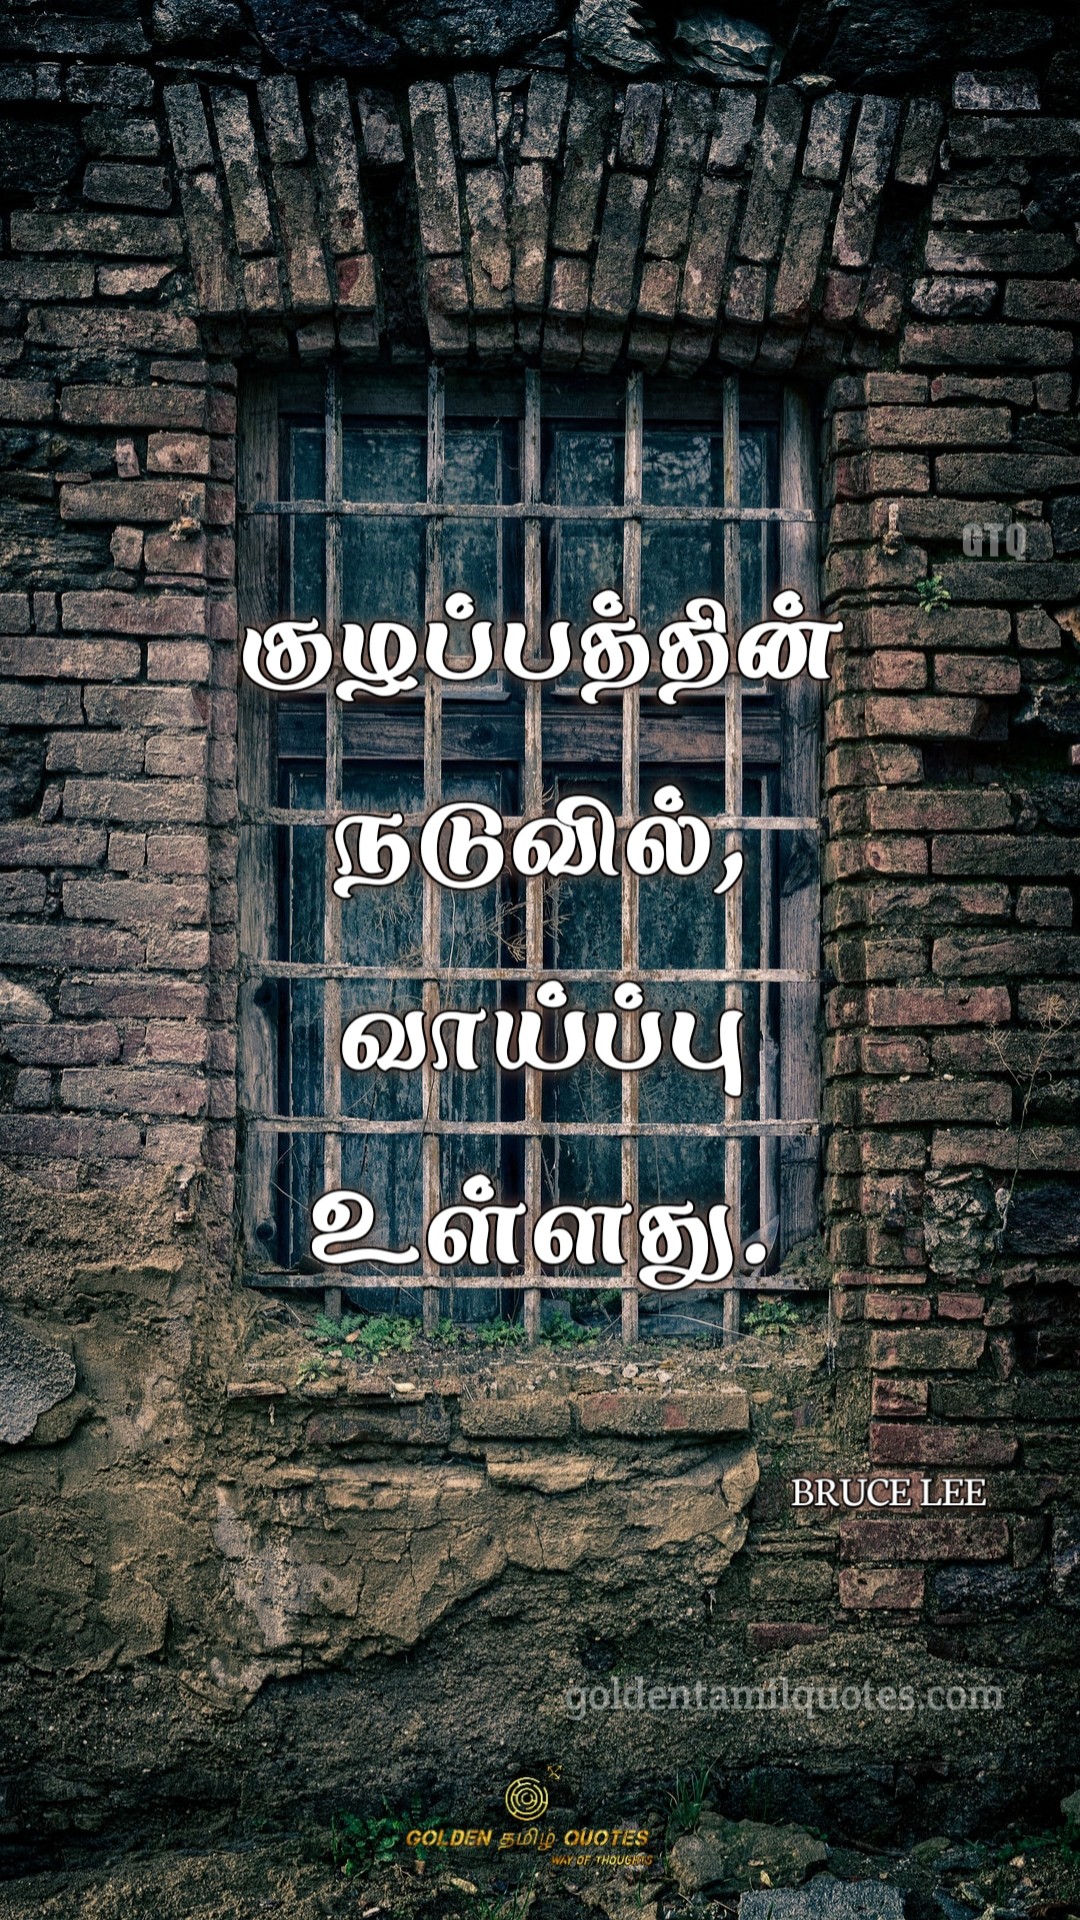 29-GREAT BRUCE LEE QUOTES IN TAMIL » GOLDEN TAMIL QUOTES HD WALLPAPER